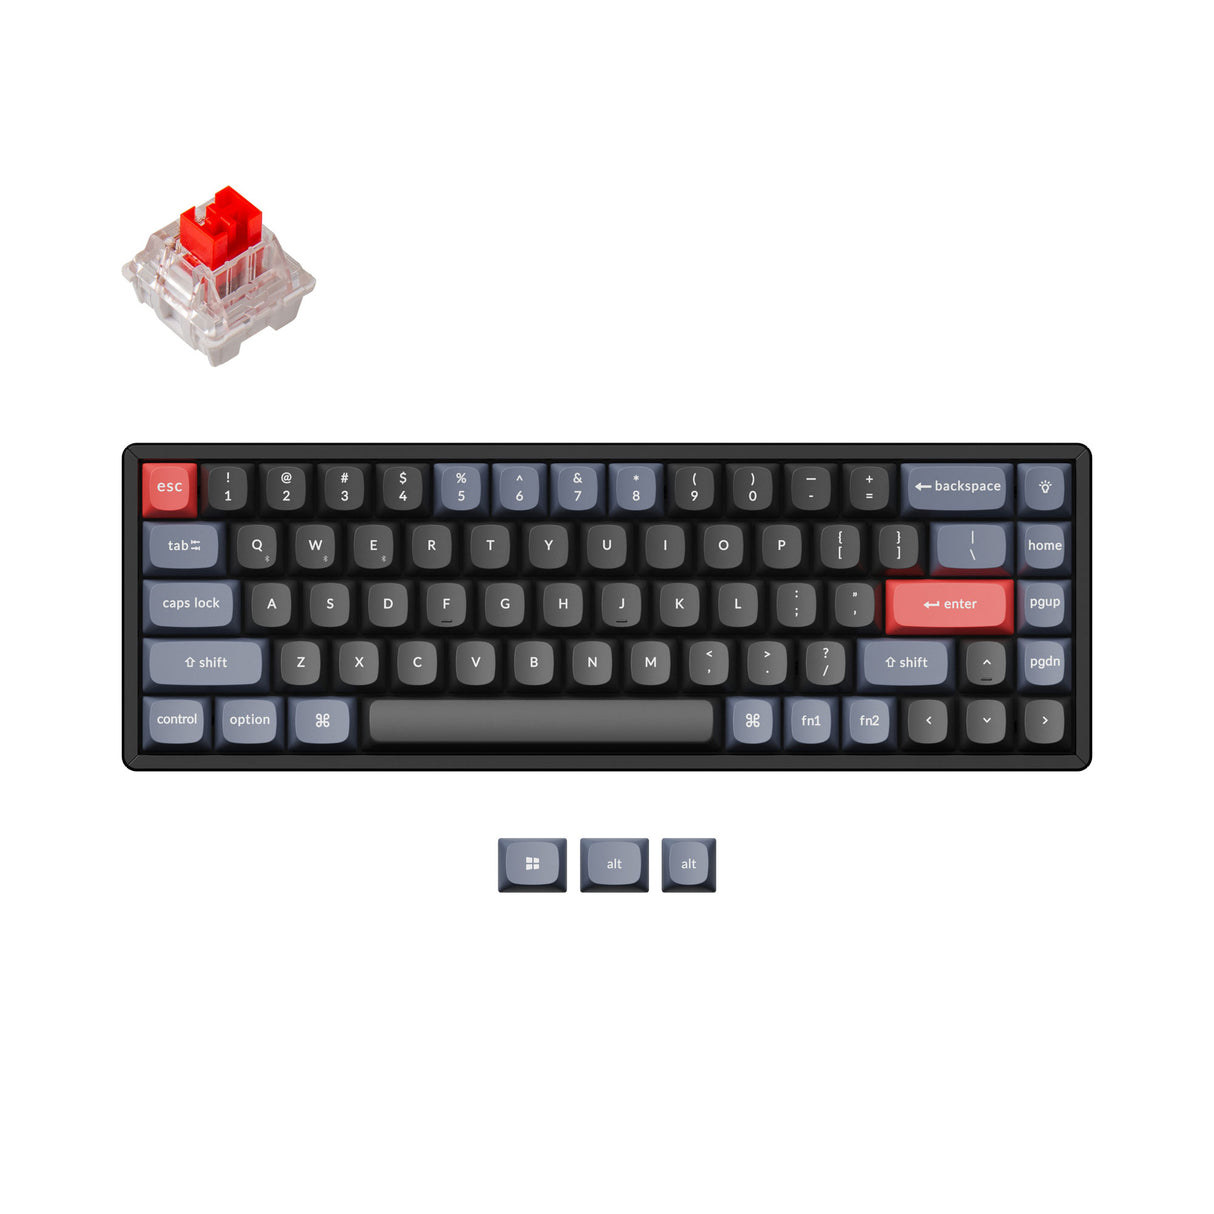 GLORIOUS Cute 65% Gaming Keyboard - Black - TKL Mechanical - - Compact  Low-Profile - Hotswap w/Cherry Mx Style - Double Shot Keycaps & Linear  Switches